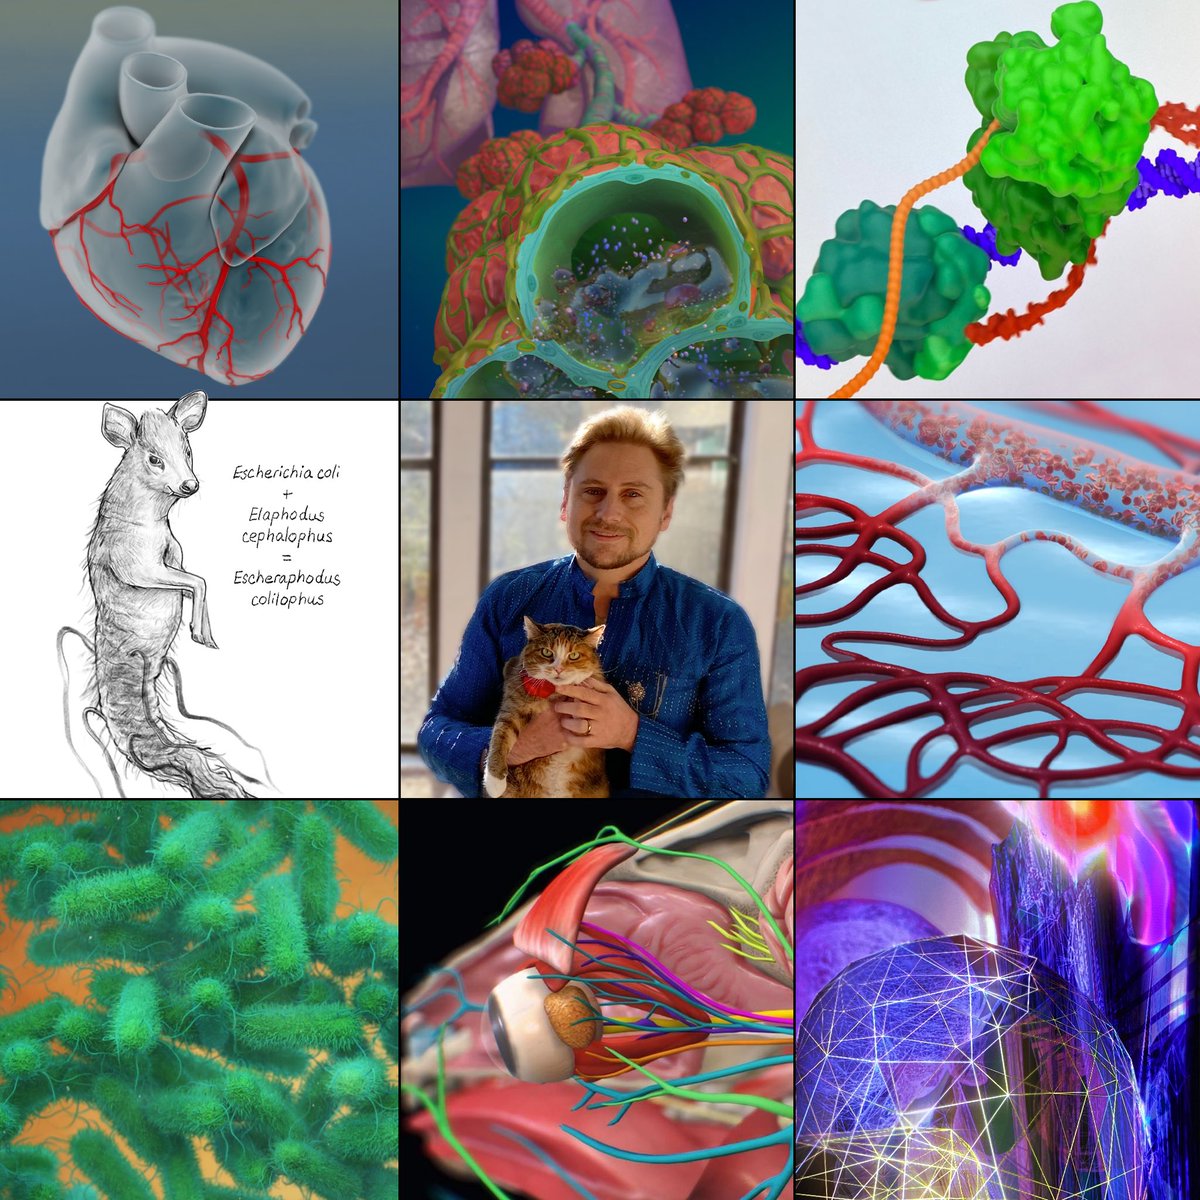 Art vs. artist to ring in the new year. Some cool/interesting projects this year
#artvsartist #artvsartist2021 #medicalillustration #medicalillustrator #sciart #illustration #happynewyear